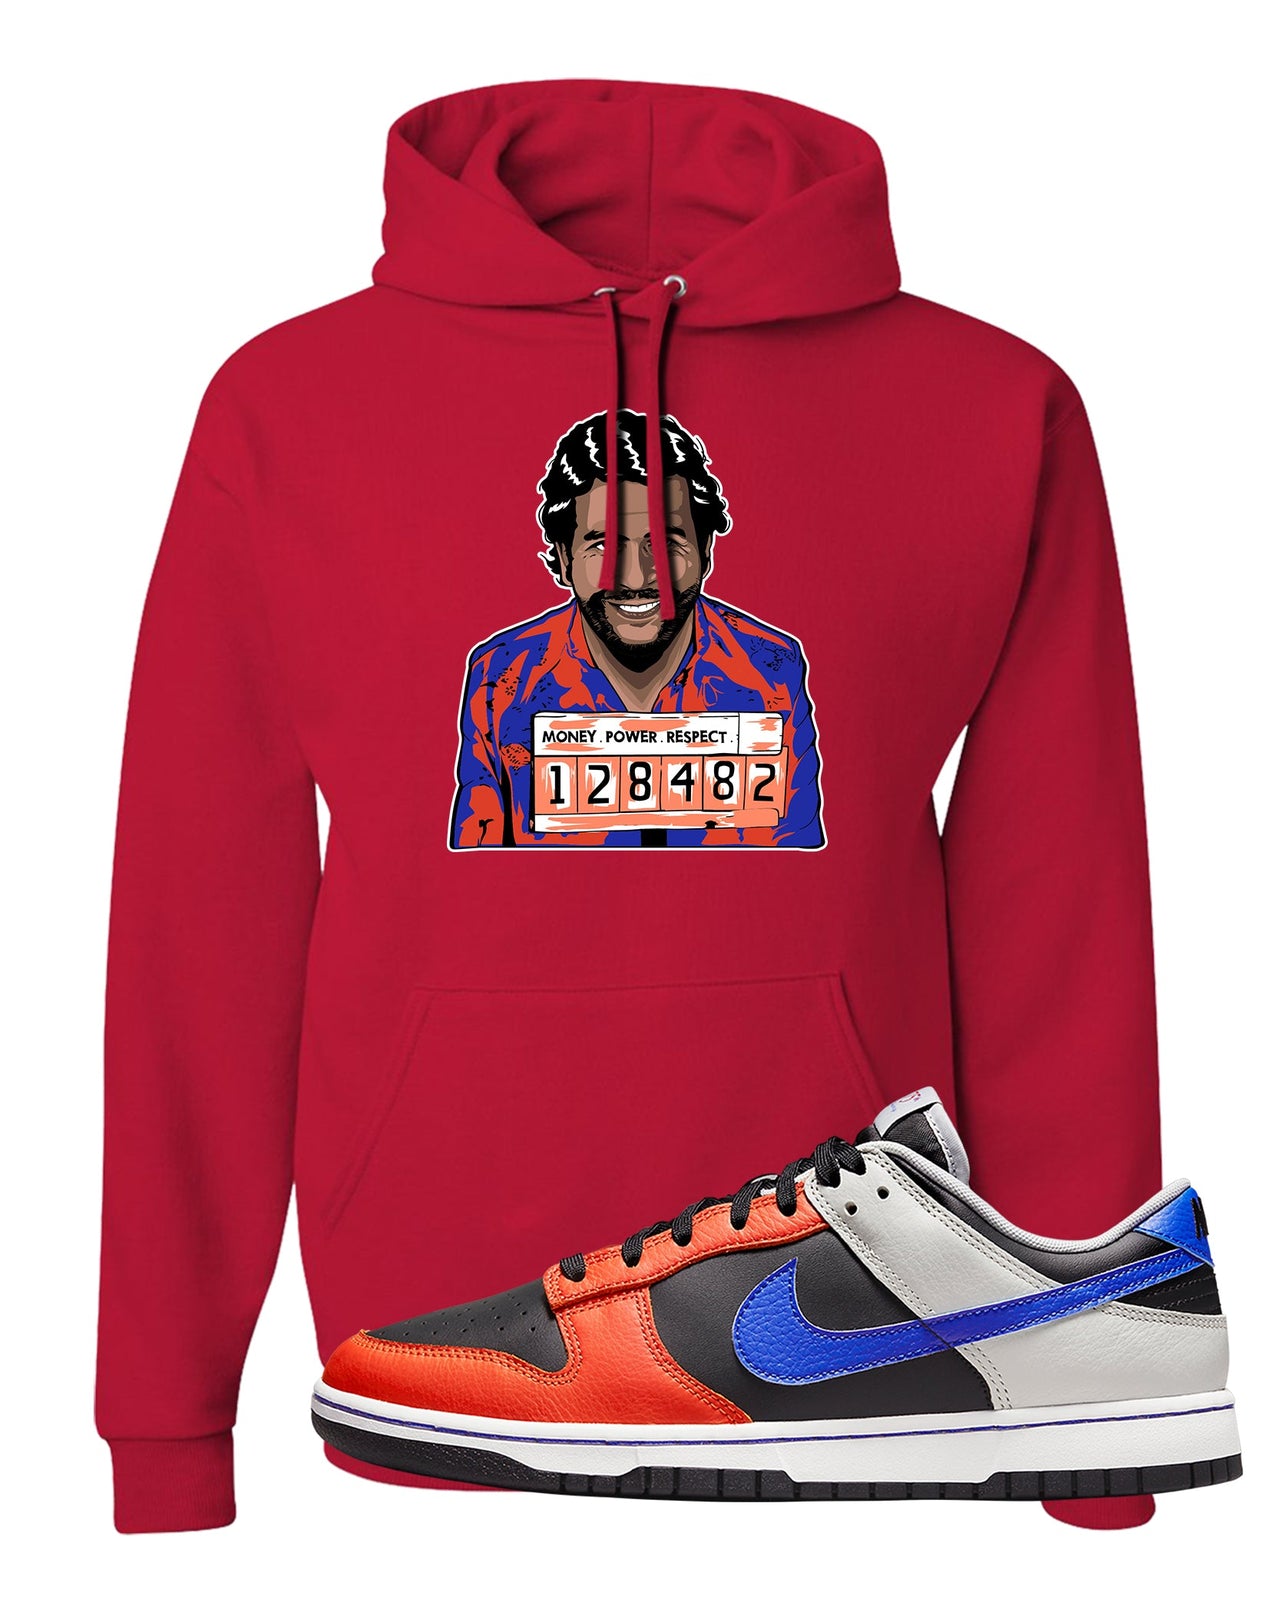 75th Anniversary Low Dunks Hoodie | Escobar Illustration, Red